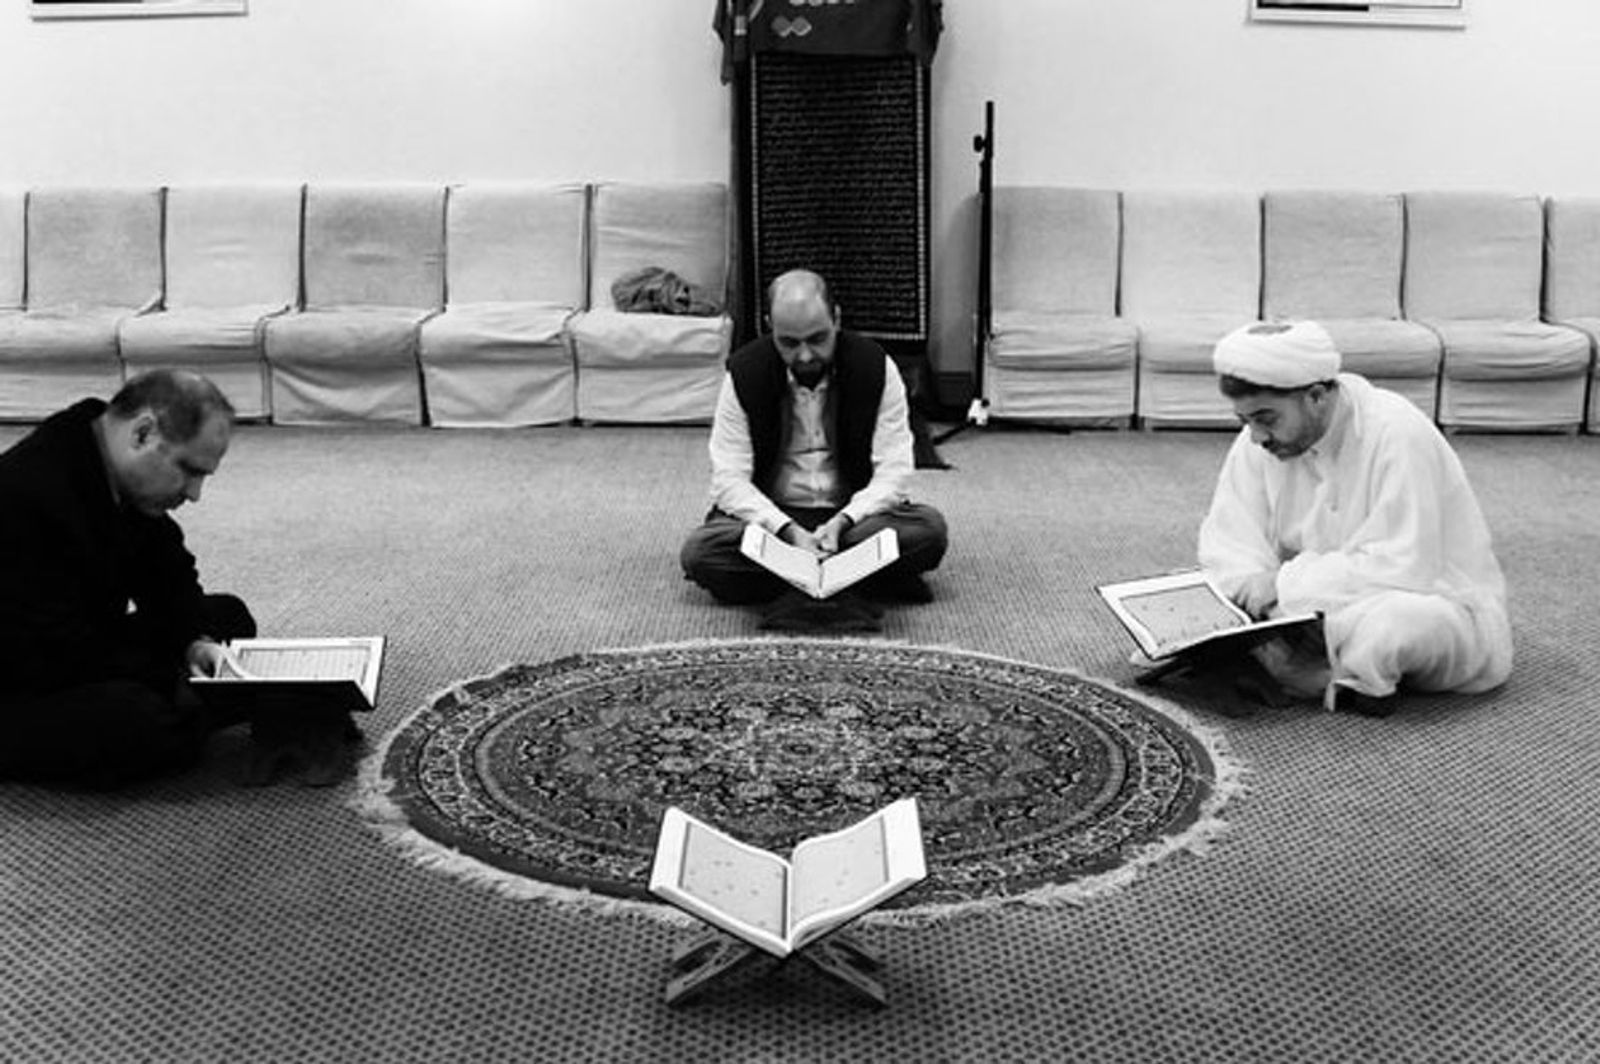 © Stephen Boyle - At the Shia Mosque in Dublin during prayers after breaking fast (Iftar) during Ramadan.MilltownAugust 2012